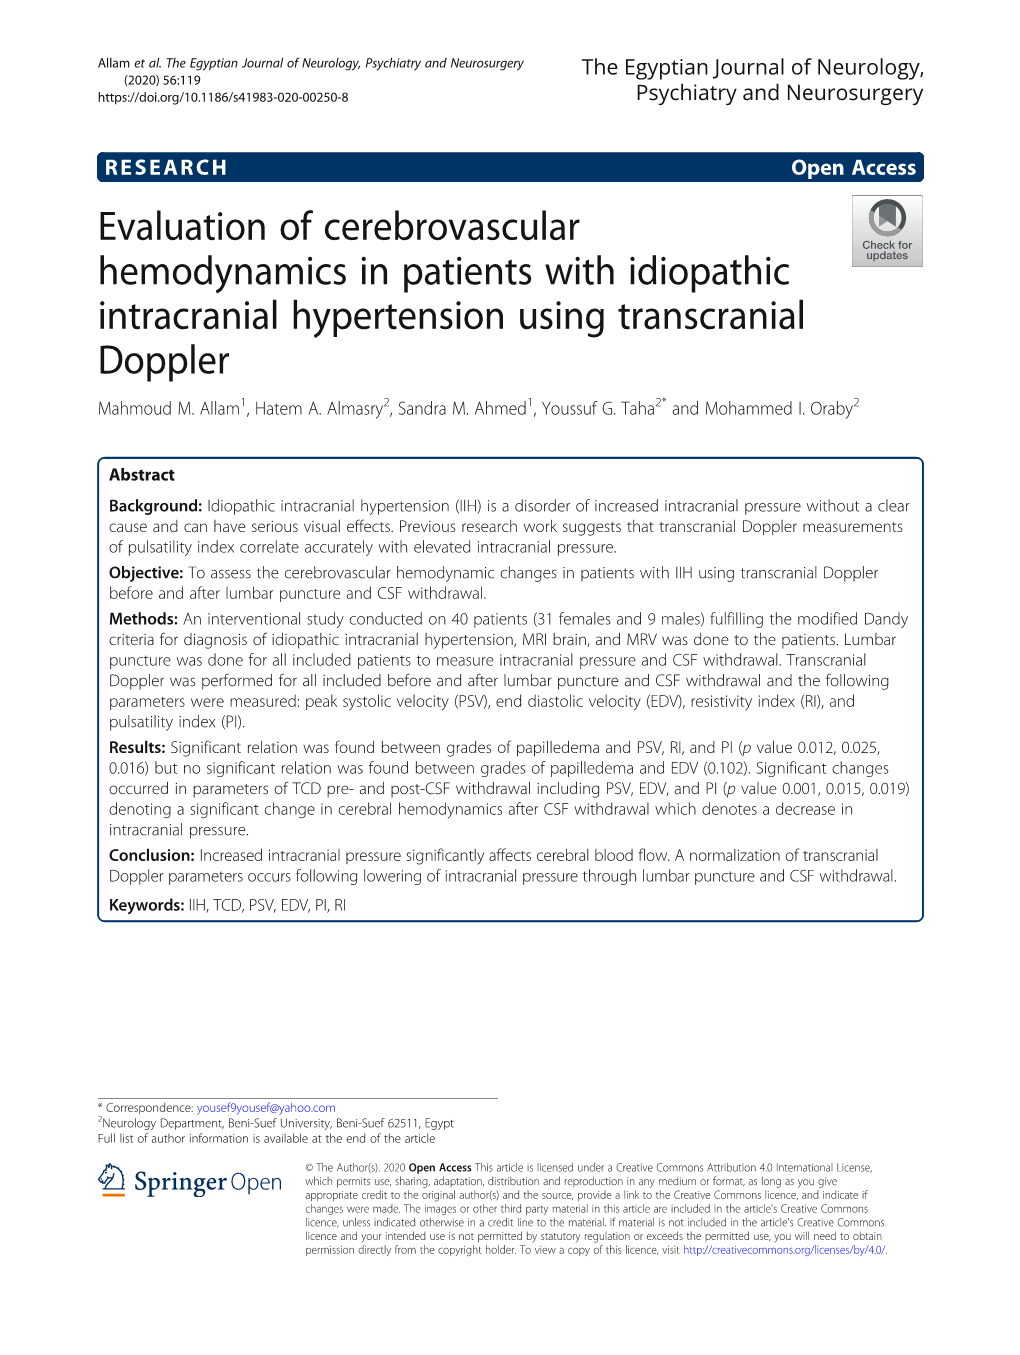 Evaluation of Cerebrovascular Hemodynamics in Patients with Idiopathic Intracranial Hypertension Using Transcranial Doppler Mahmoud M